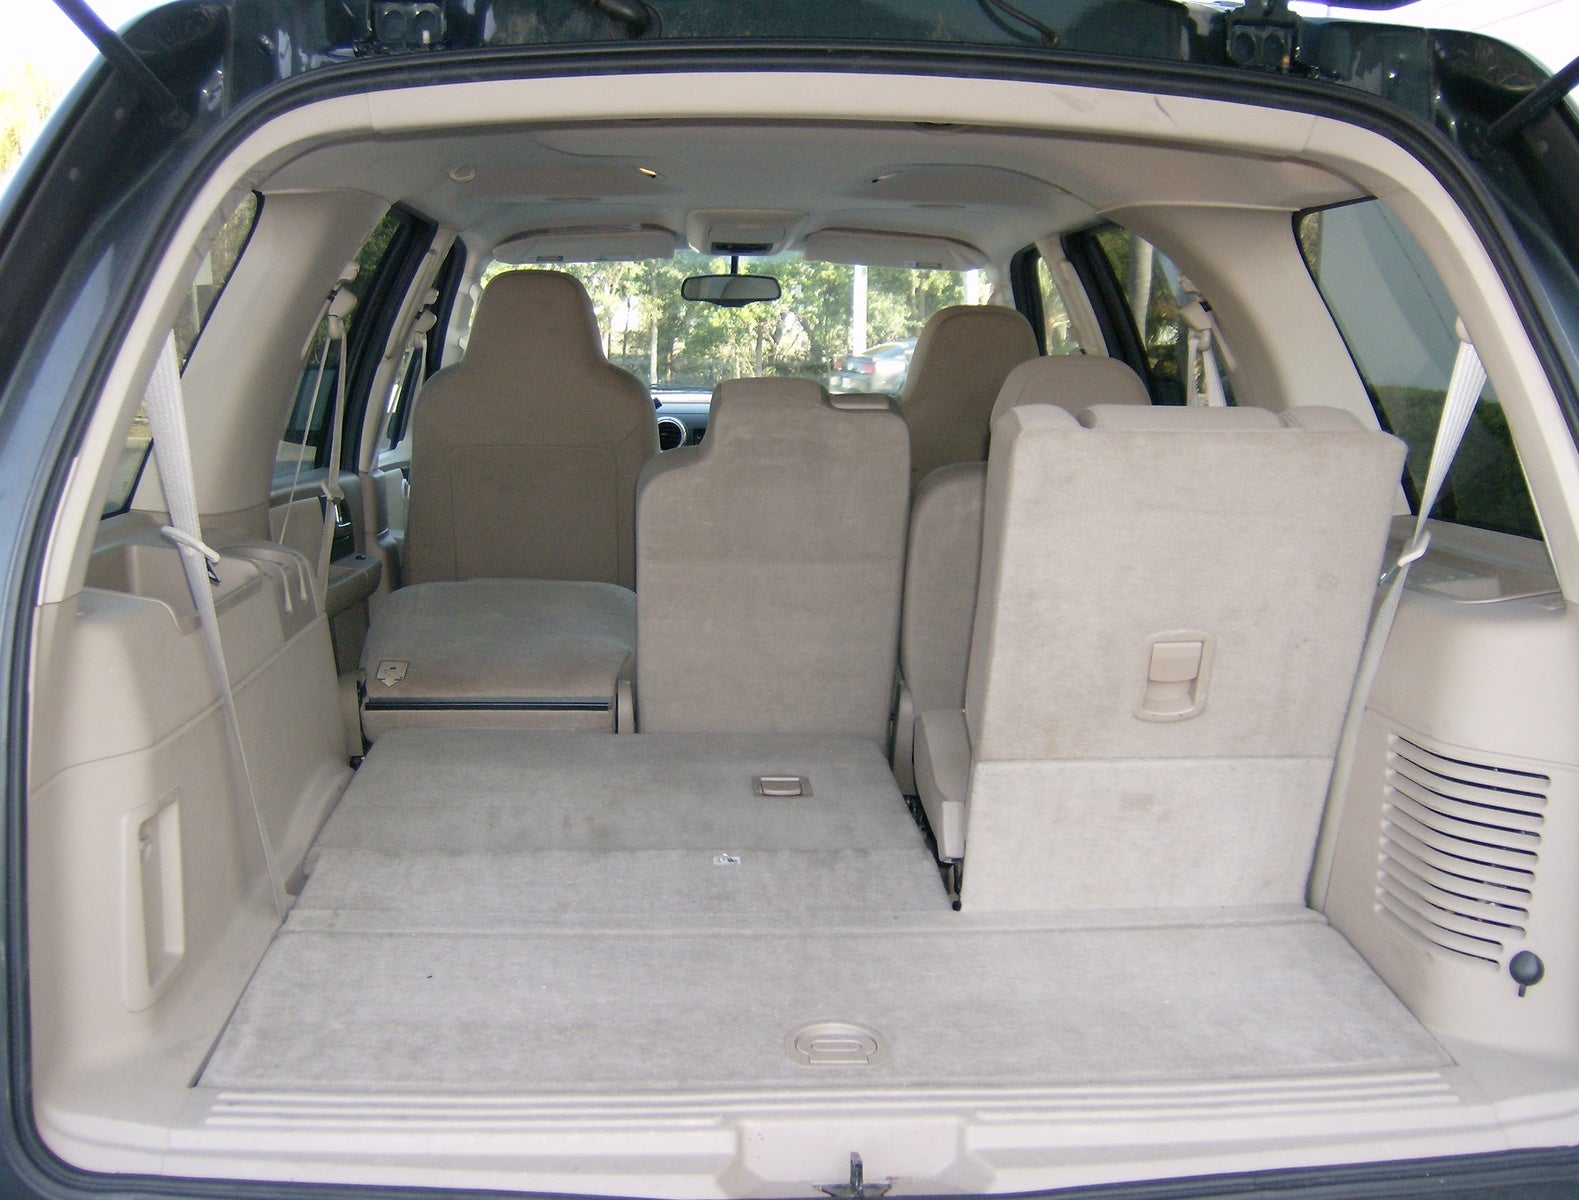 2008 Ford expedition interior dimensions